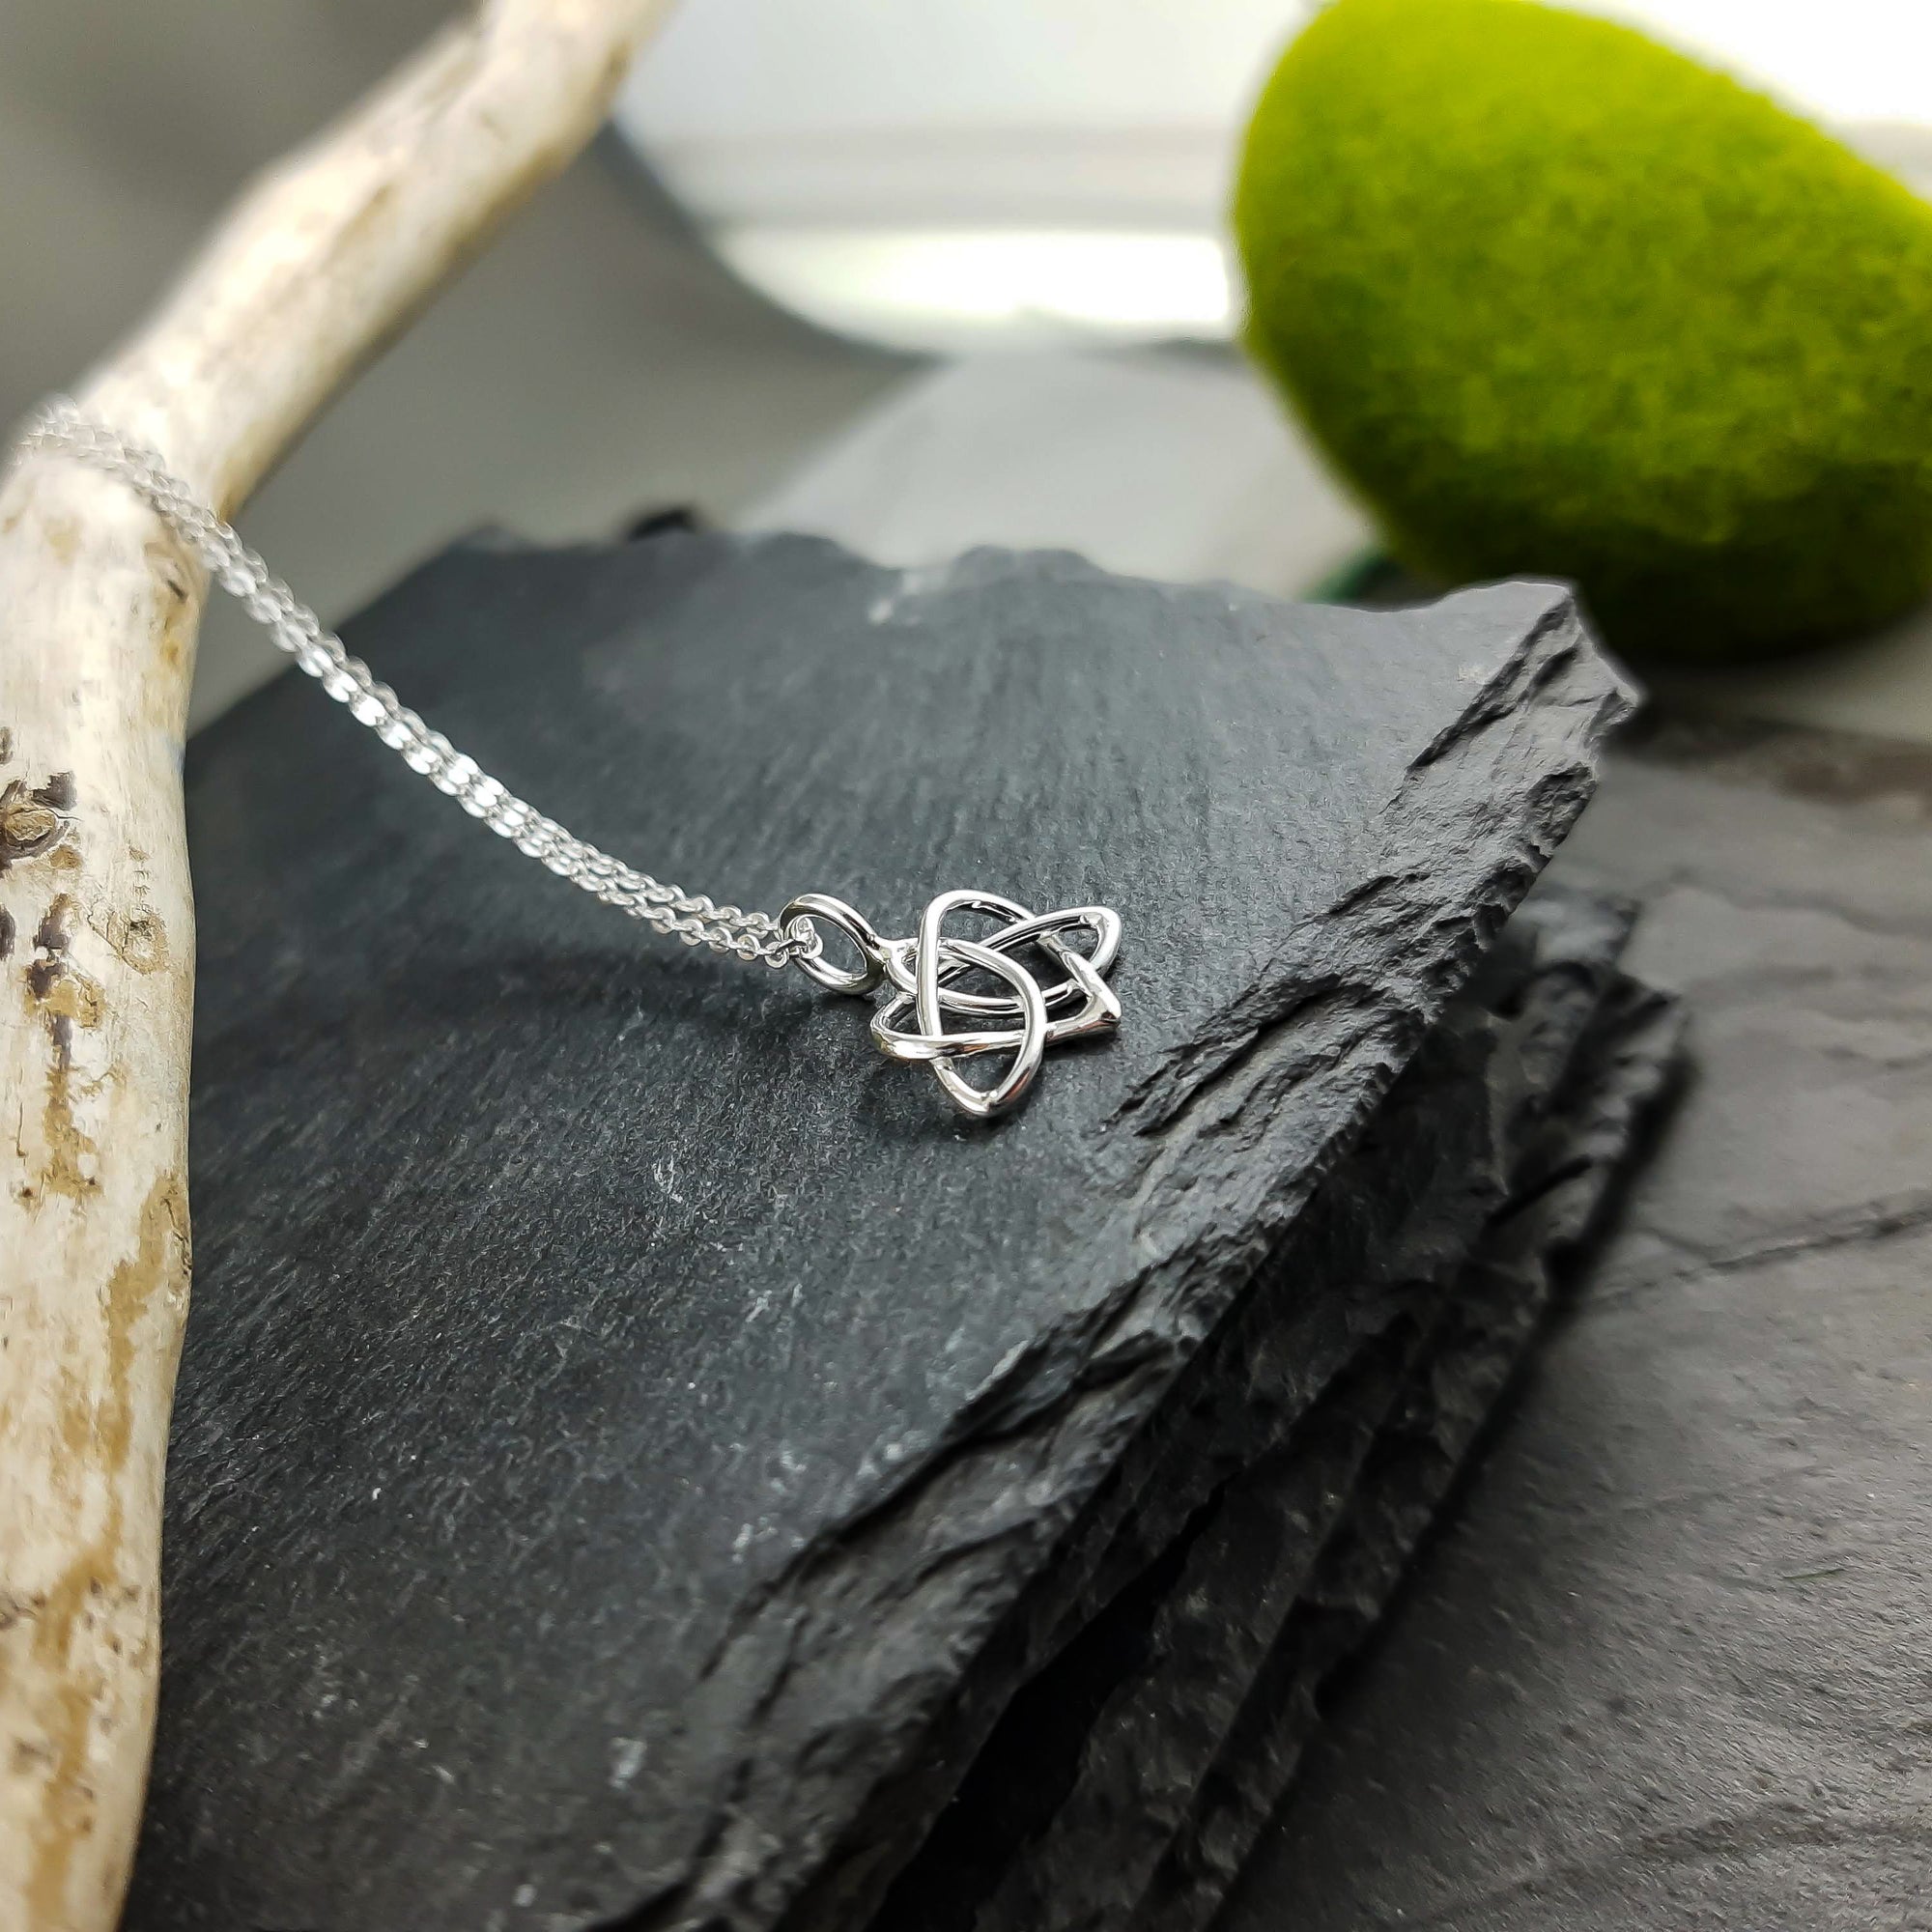 Celtic knot pendant in sterling silver